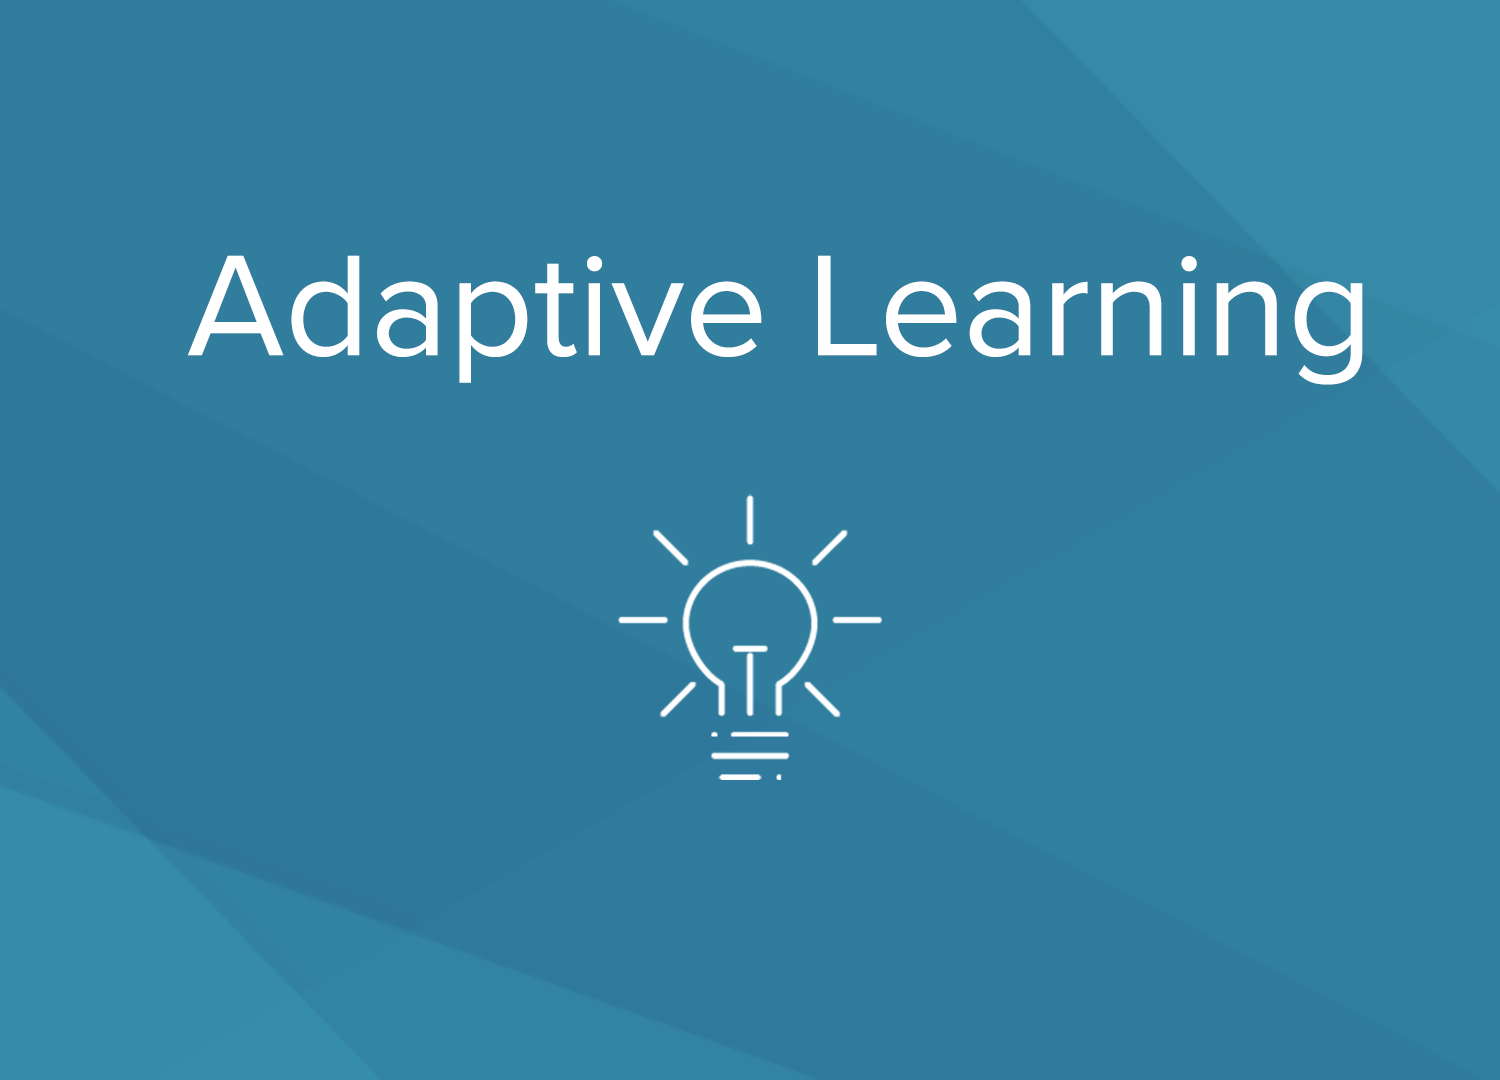 What Is Adaptive Learning?